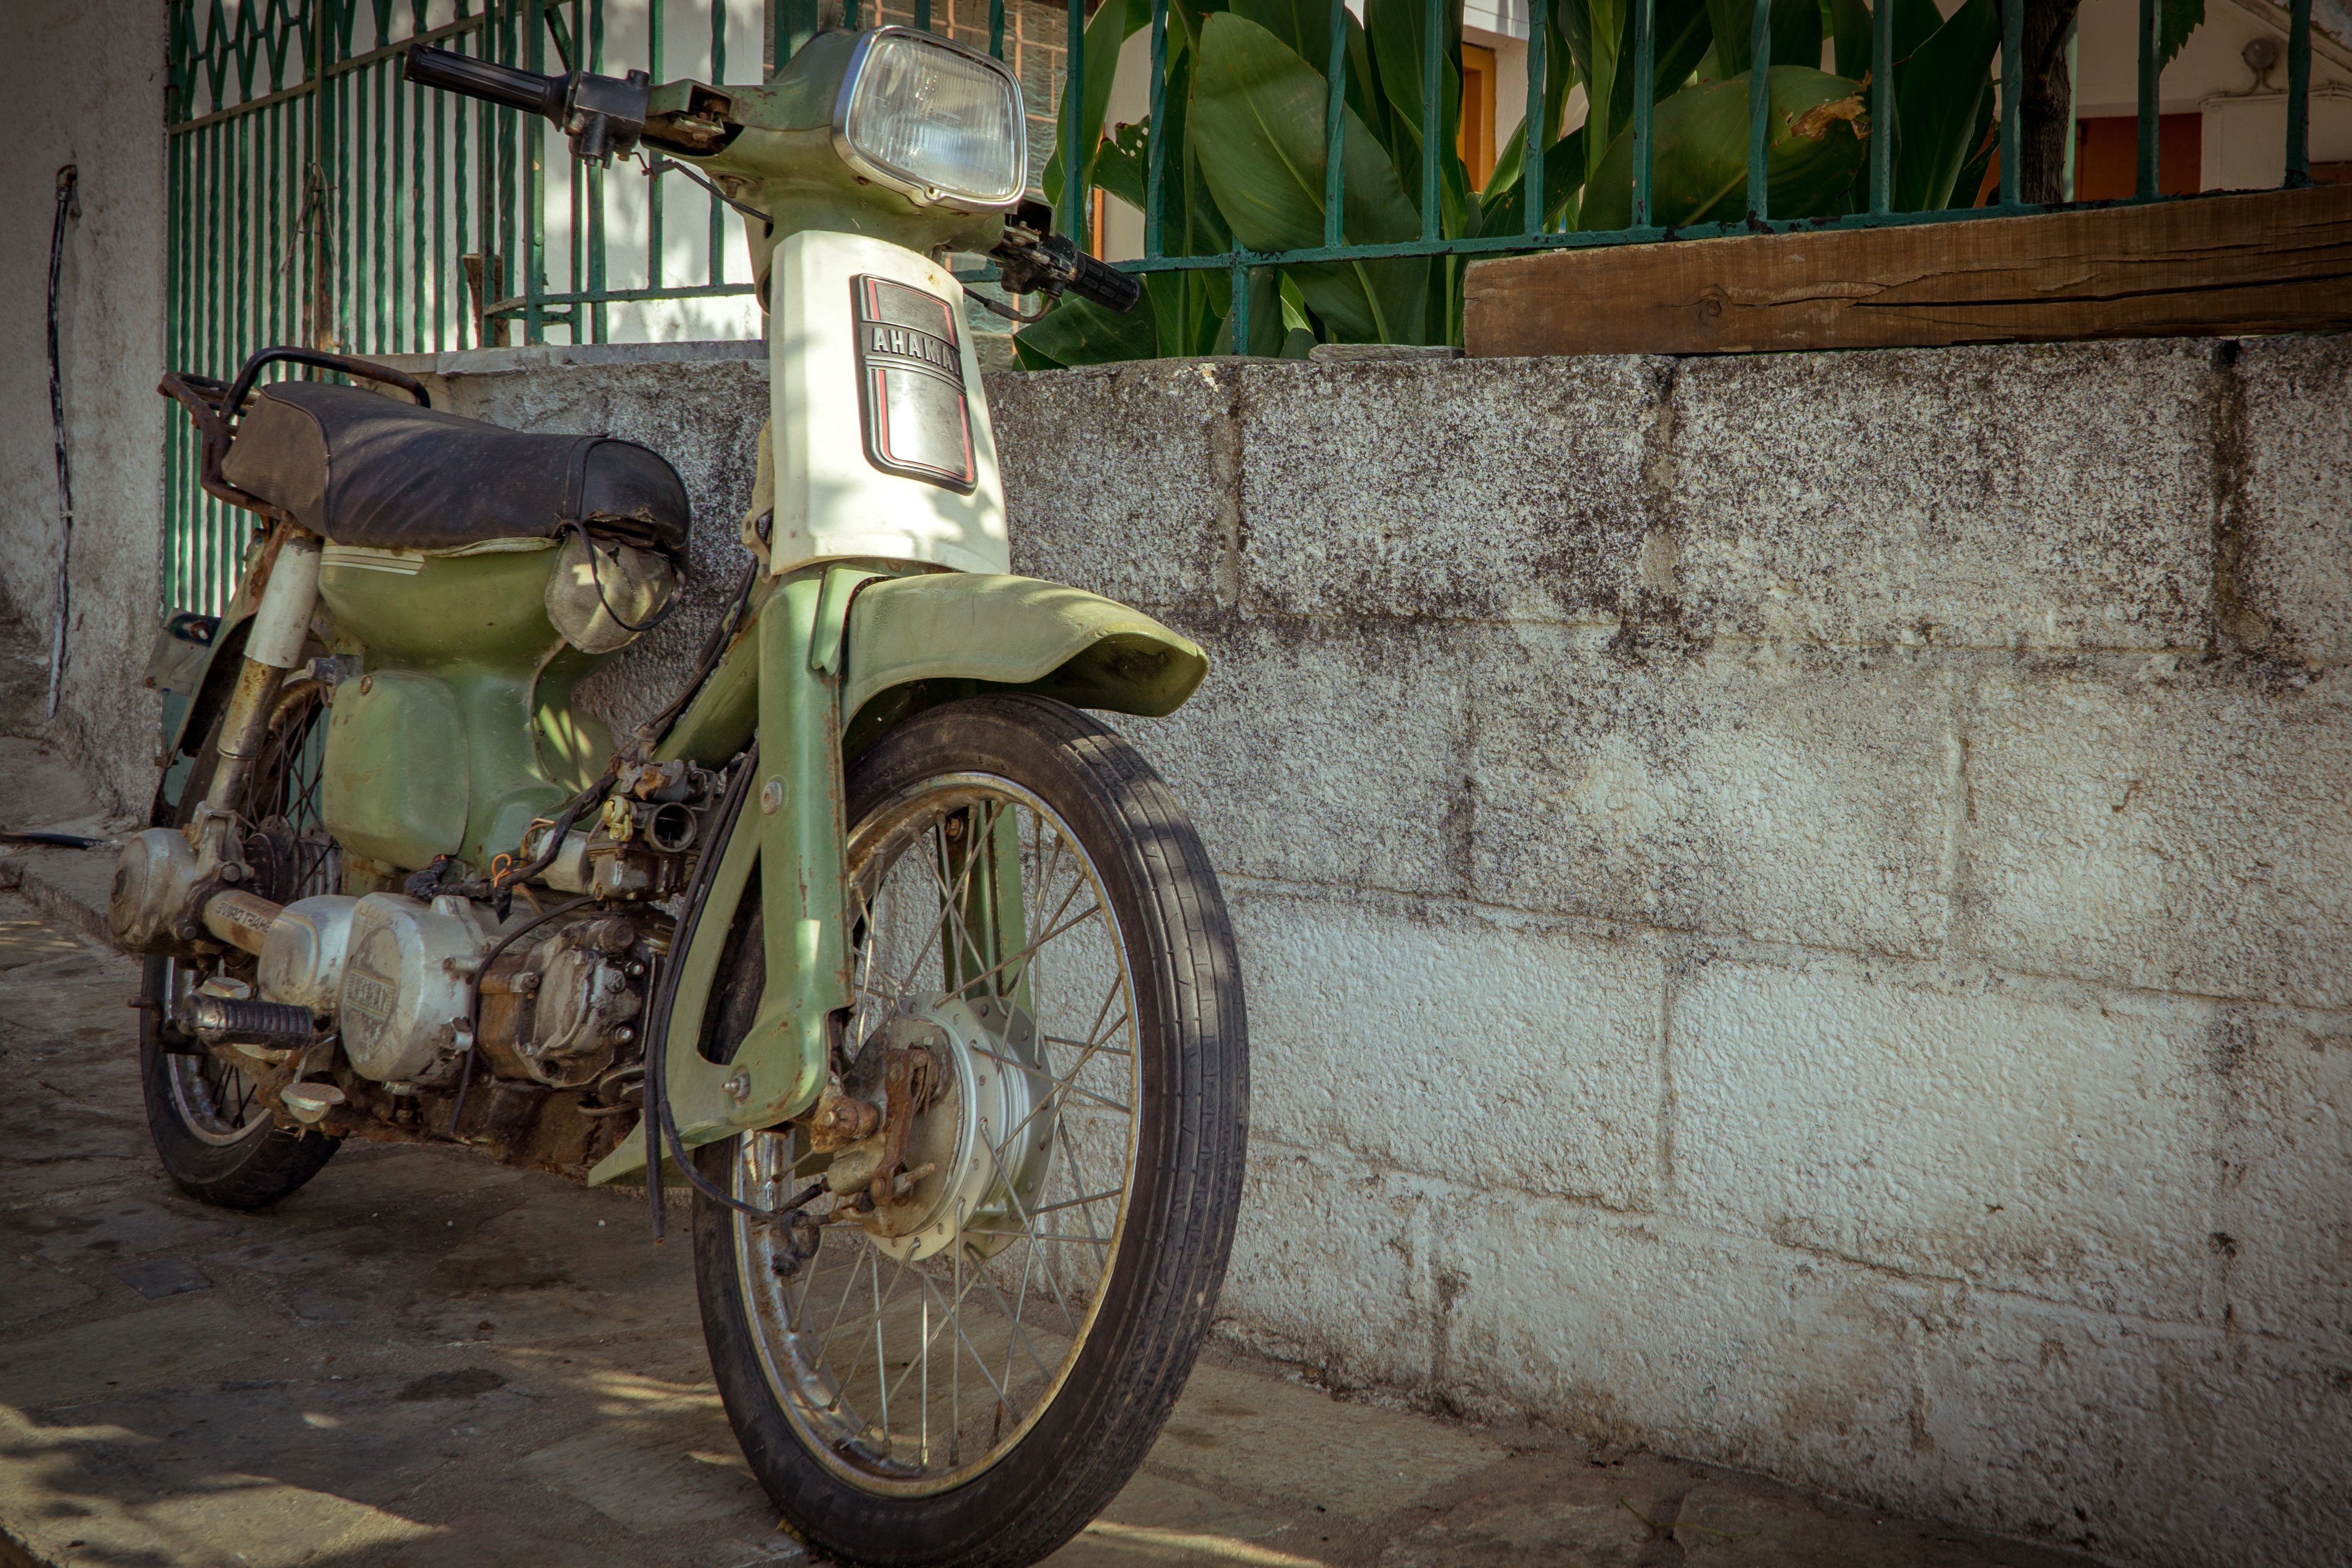 Free picture: old, motor, scooter, vehicle, moped, motorcycle, oldtimer